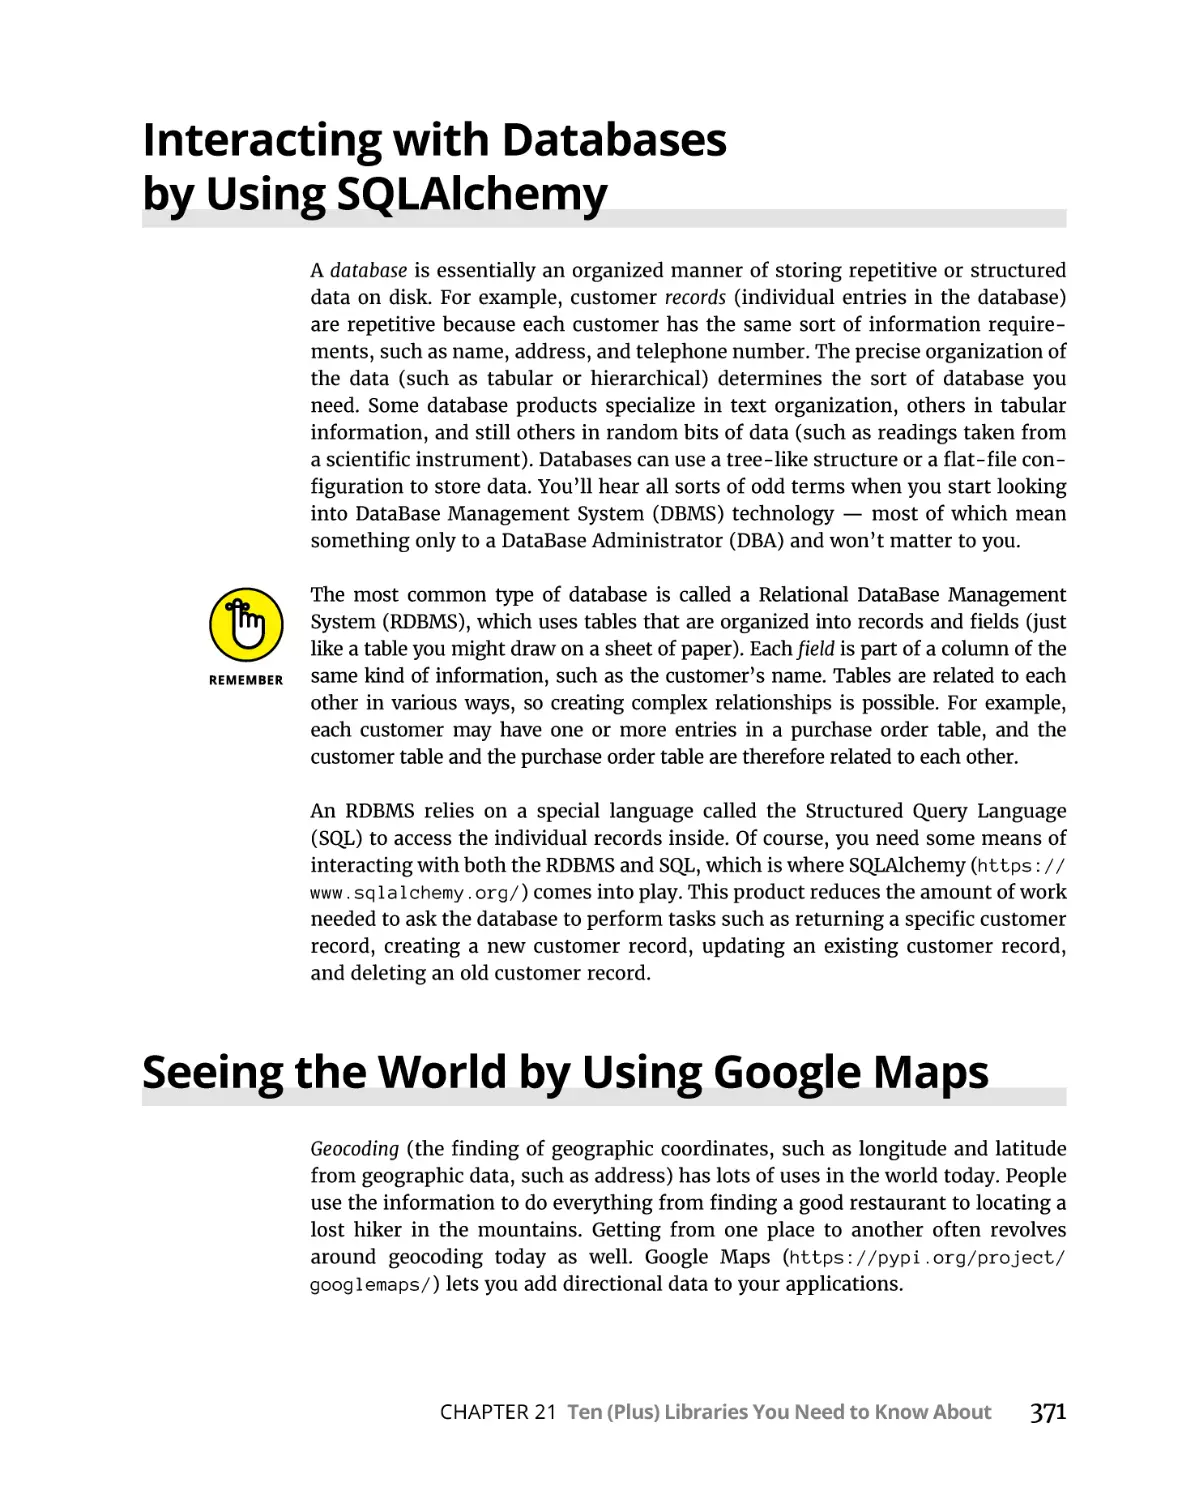 Interacting with Databases by Using SQLAlchemy
Seeing the World by Using Google Maps